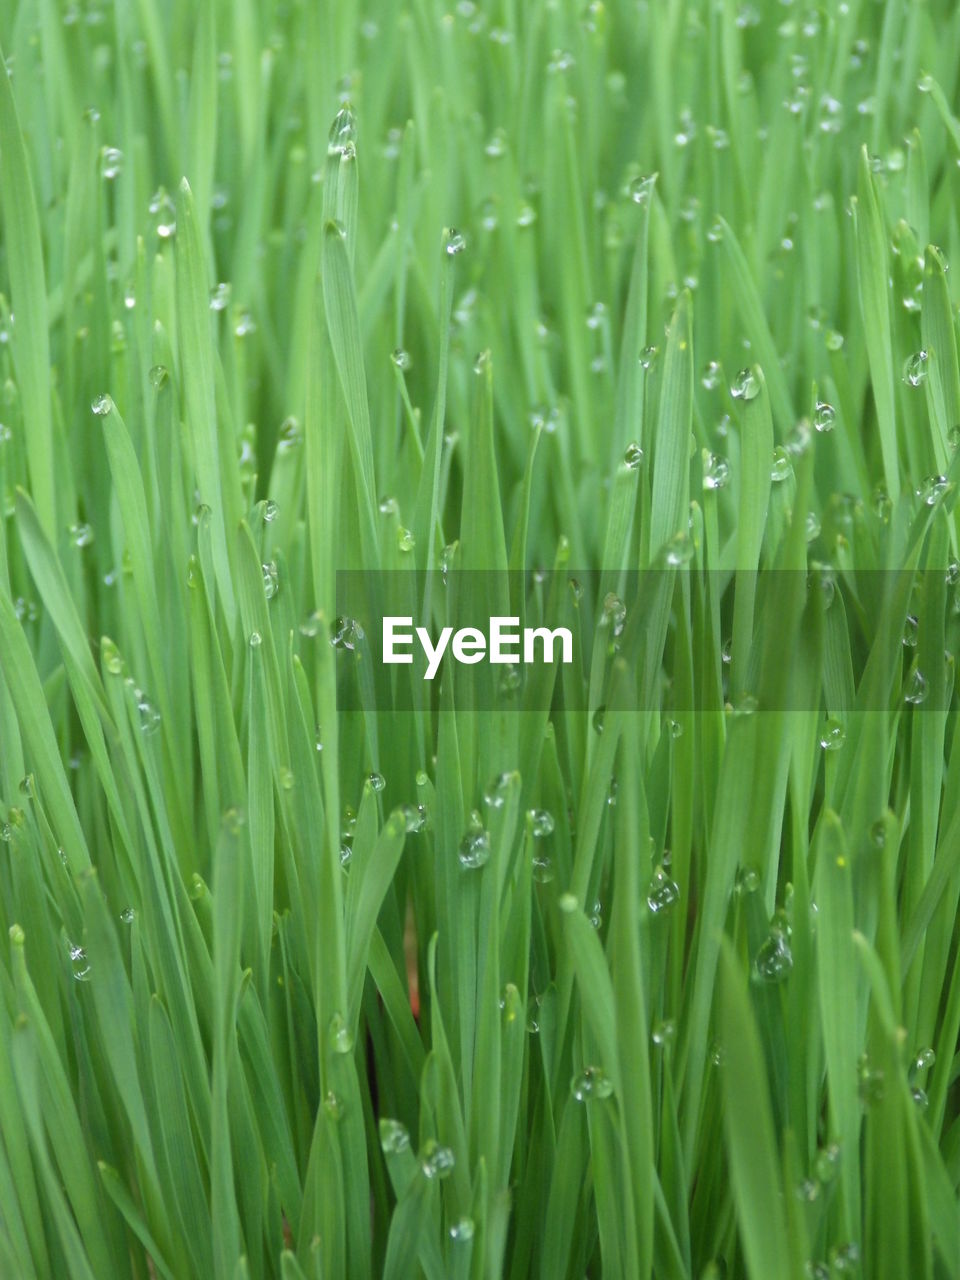 green, plant, growth, grass, full frame, backgrounds, nature, beauty in nature, no people, lawn, plant stem, field, land, freshness, close-up, day, wet, drop, agriculture, wheatgrass, grassland, water, outdoors, hierochloe, crop, blade of grass, tranquility, dew, plant part, cereal plant